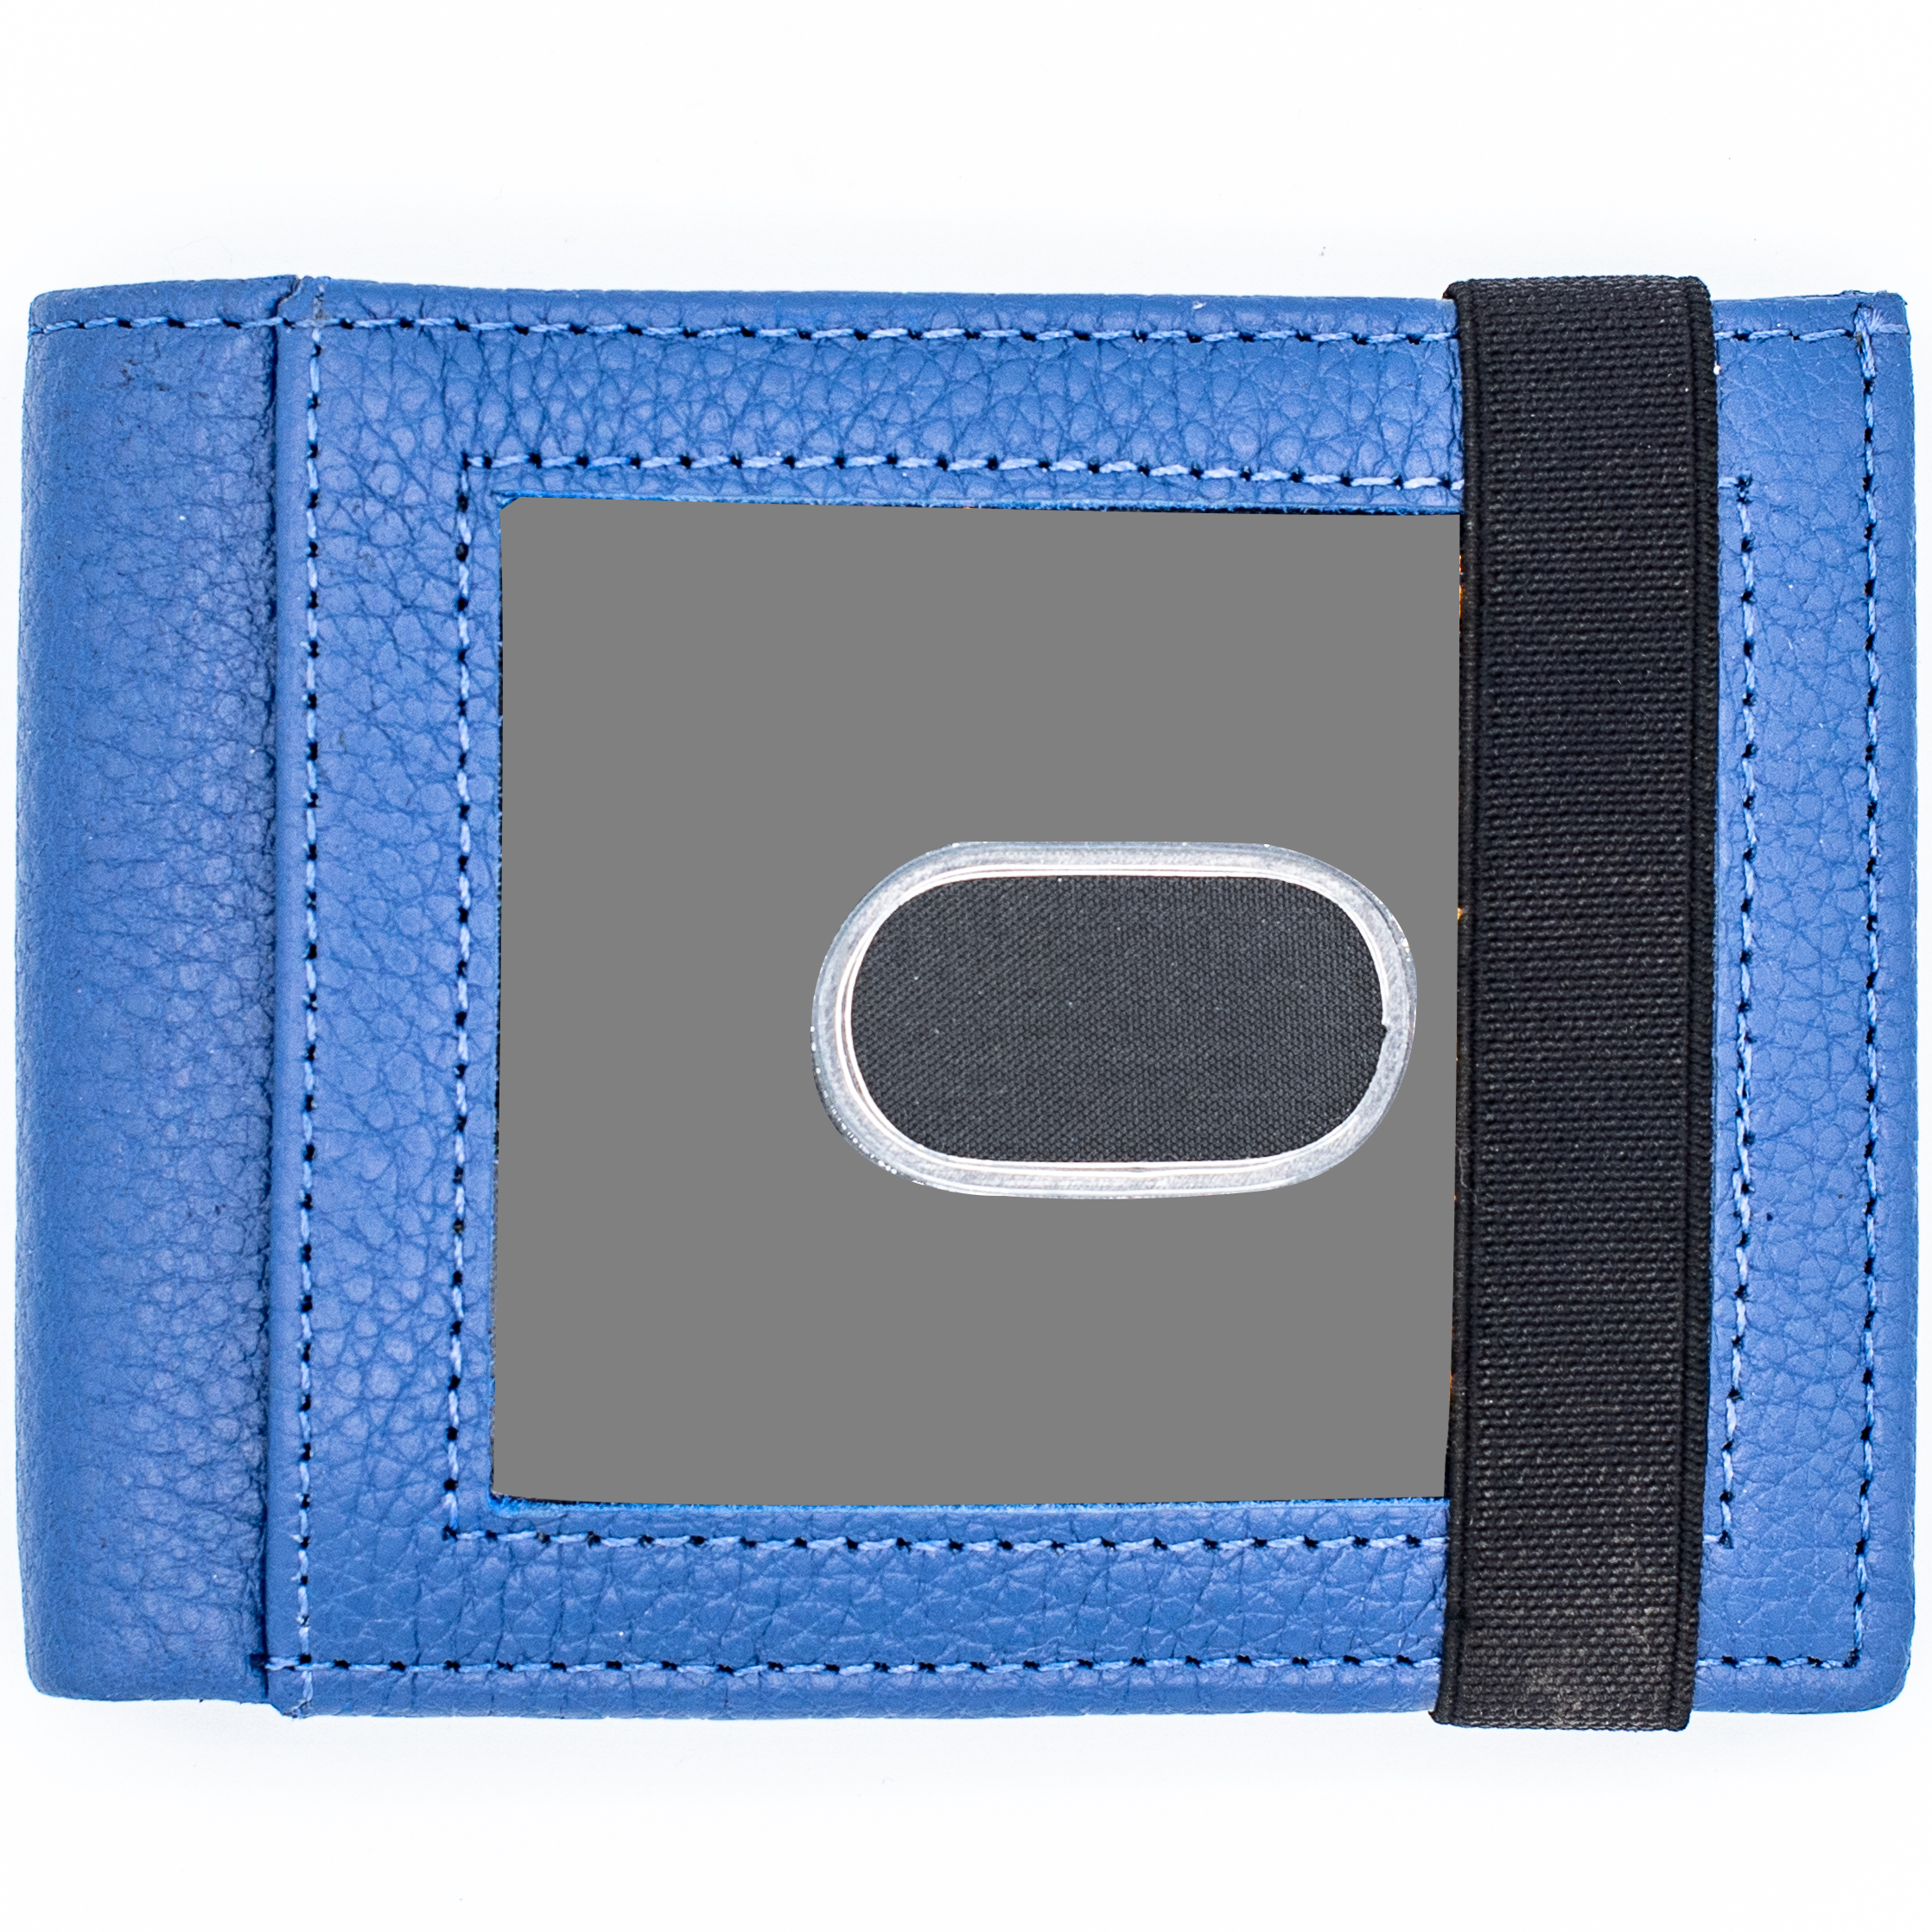 RFID Safe Biker Men's Soft Leather Bifold Chain Wallet with Elastic Card Case Navy - image 1 of 5